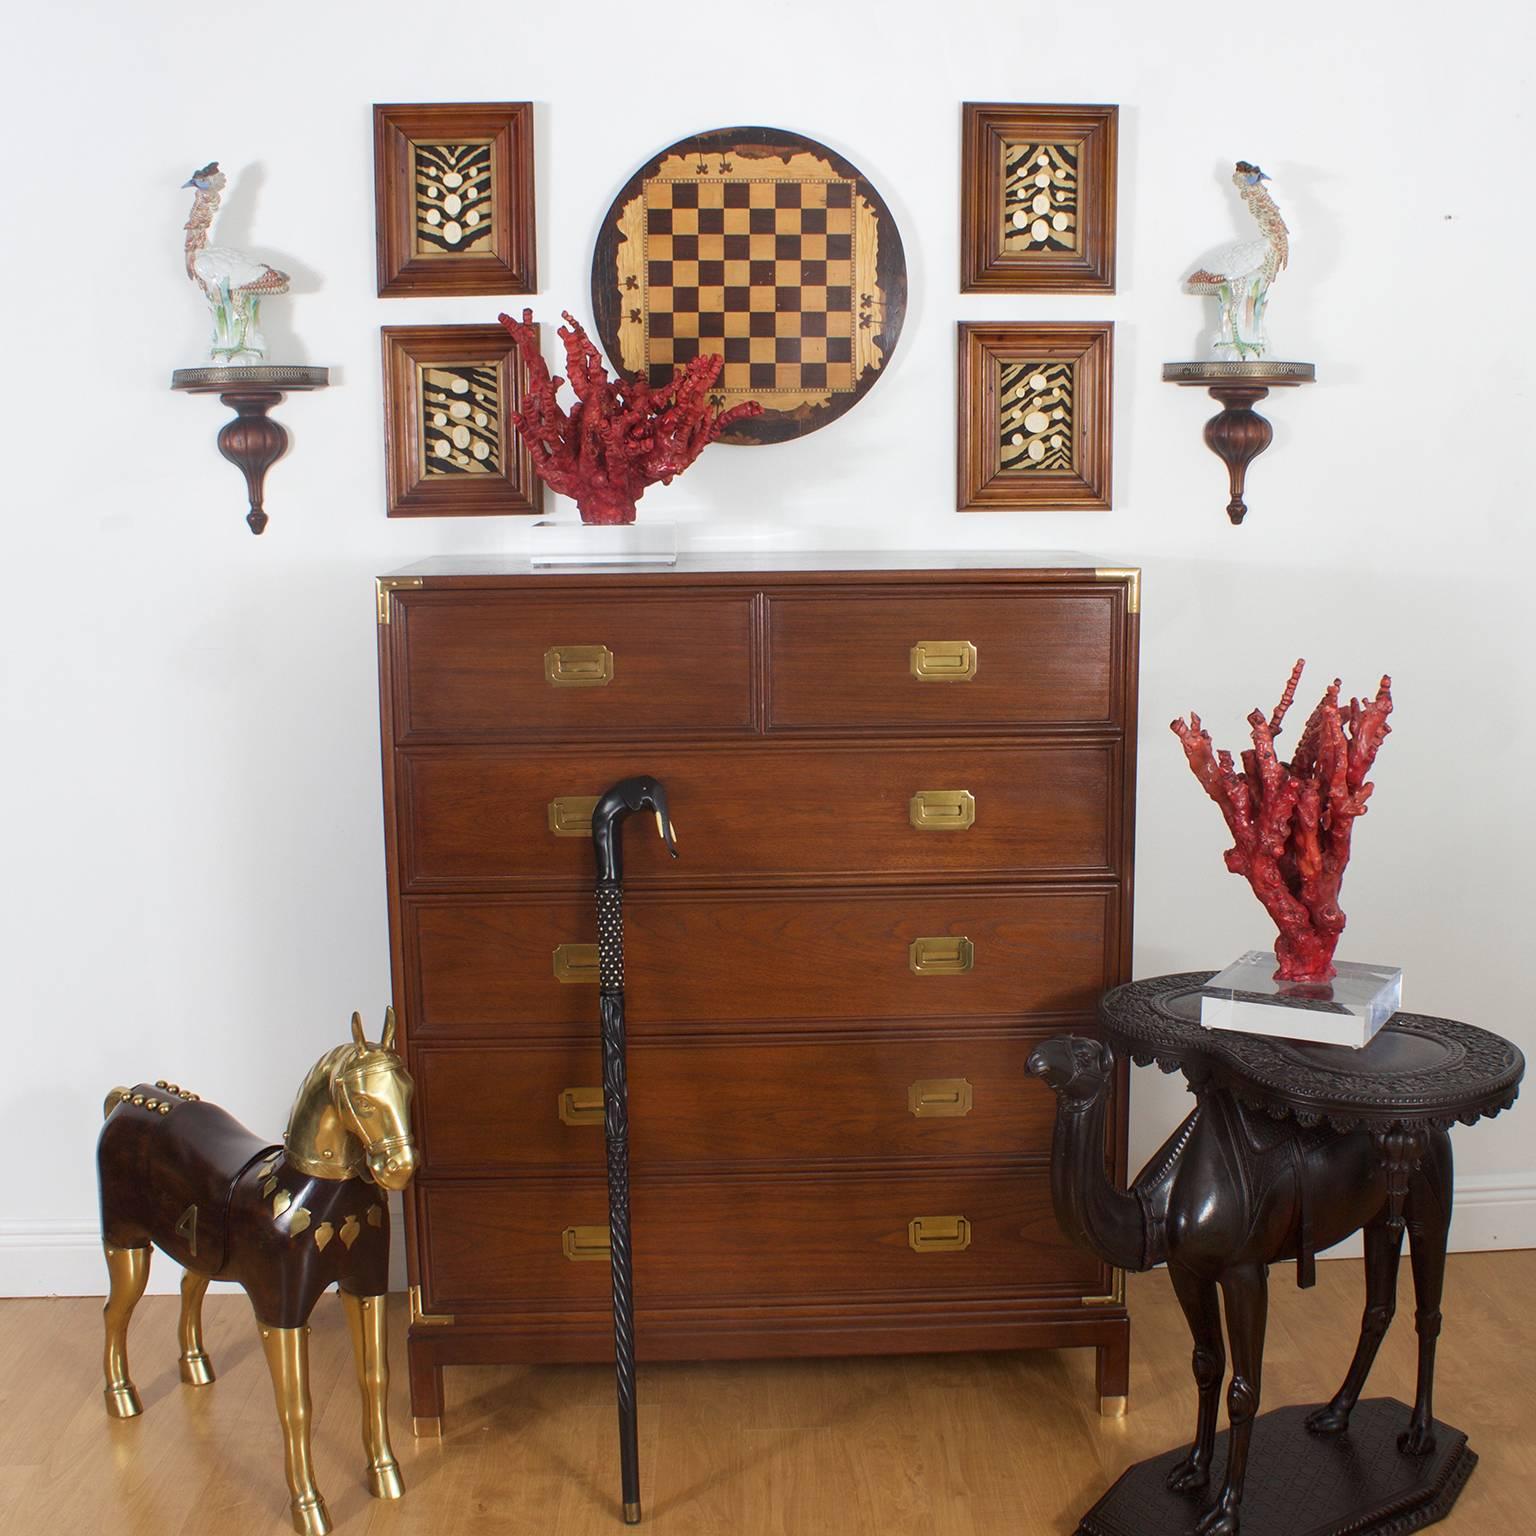 Handsome Campaign style mahogany gentlemen chest of drawers. Having a sleek and simple Mid Century type form with 2 smaller drawers on top that sit over 4 wide drawers for plenty of storage. Featuring campaign style brass hardware and asian modern